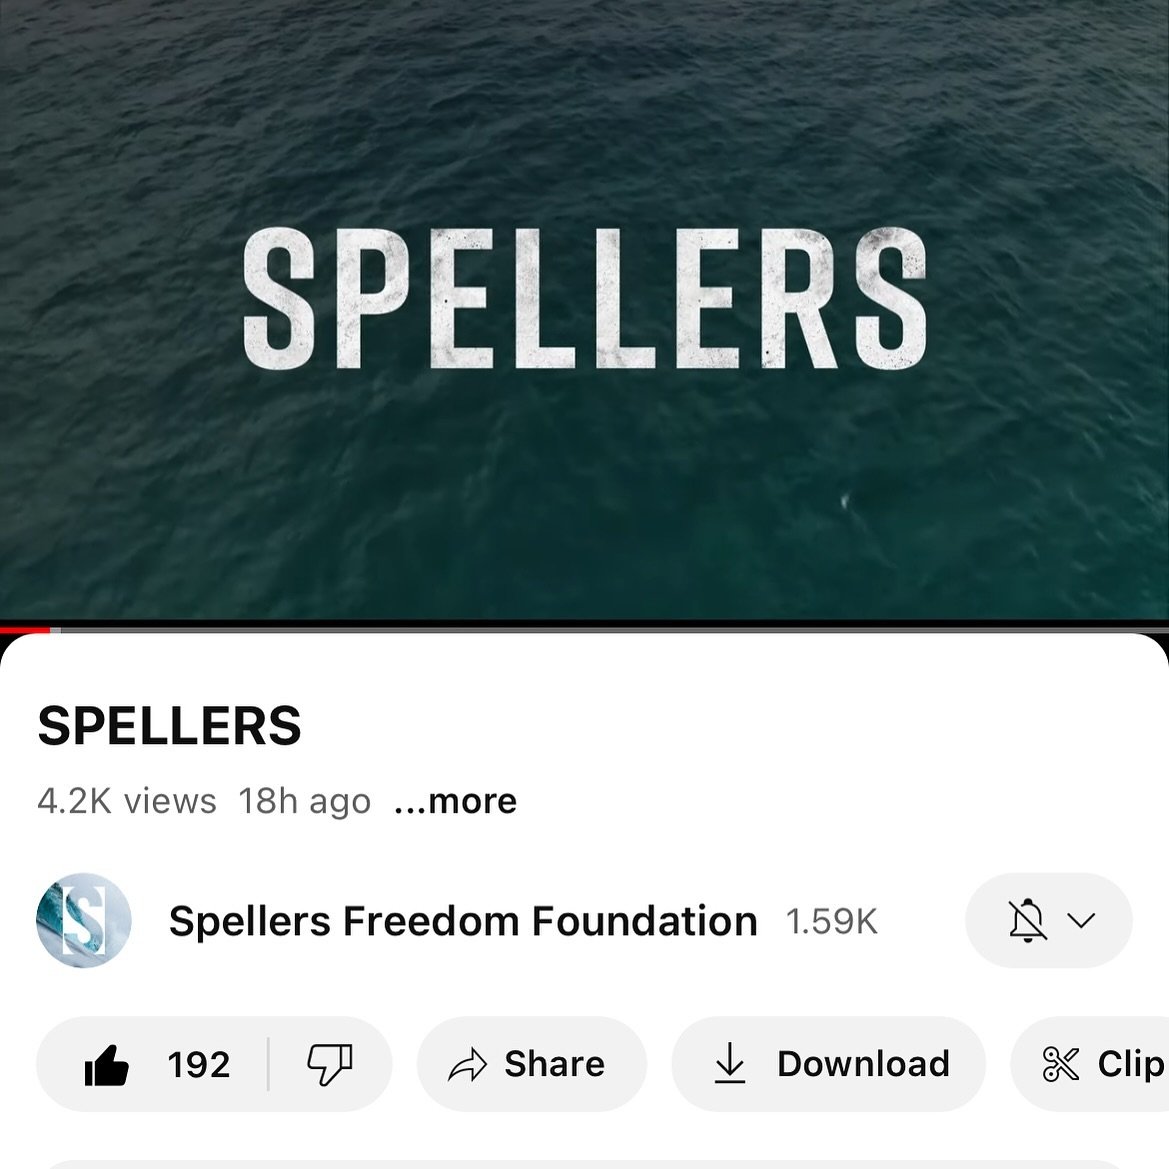 So exciting to have SPELLERS on YouTube and available to all!! Honored to have been able to work on this amazing film with all these incredible people! 

@jbhandleyjr @flowfilmco @23dmg @_dana.johns @evanmrogers @dathangraham @christina.wen.26 @spell